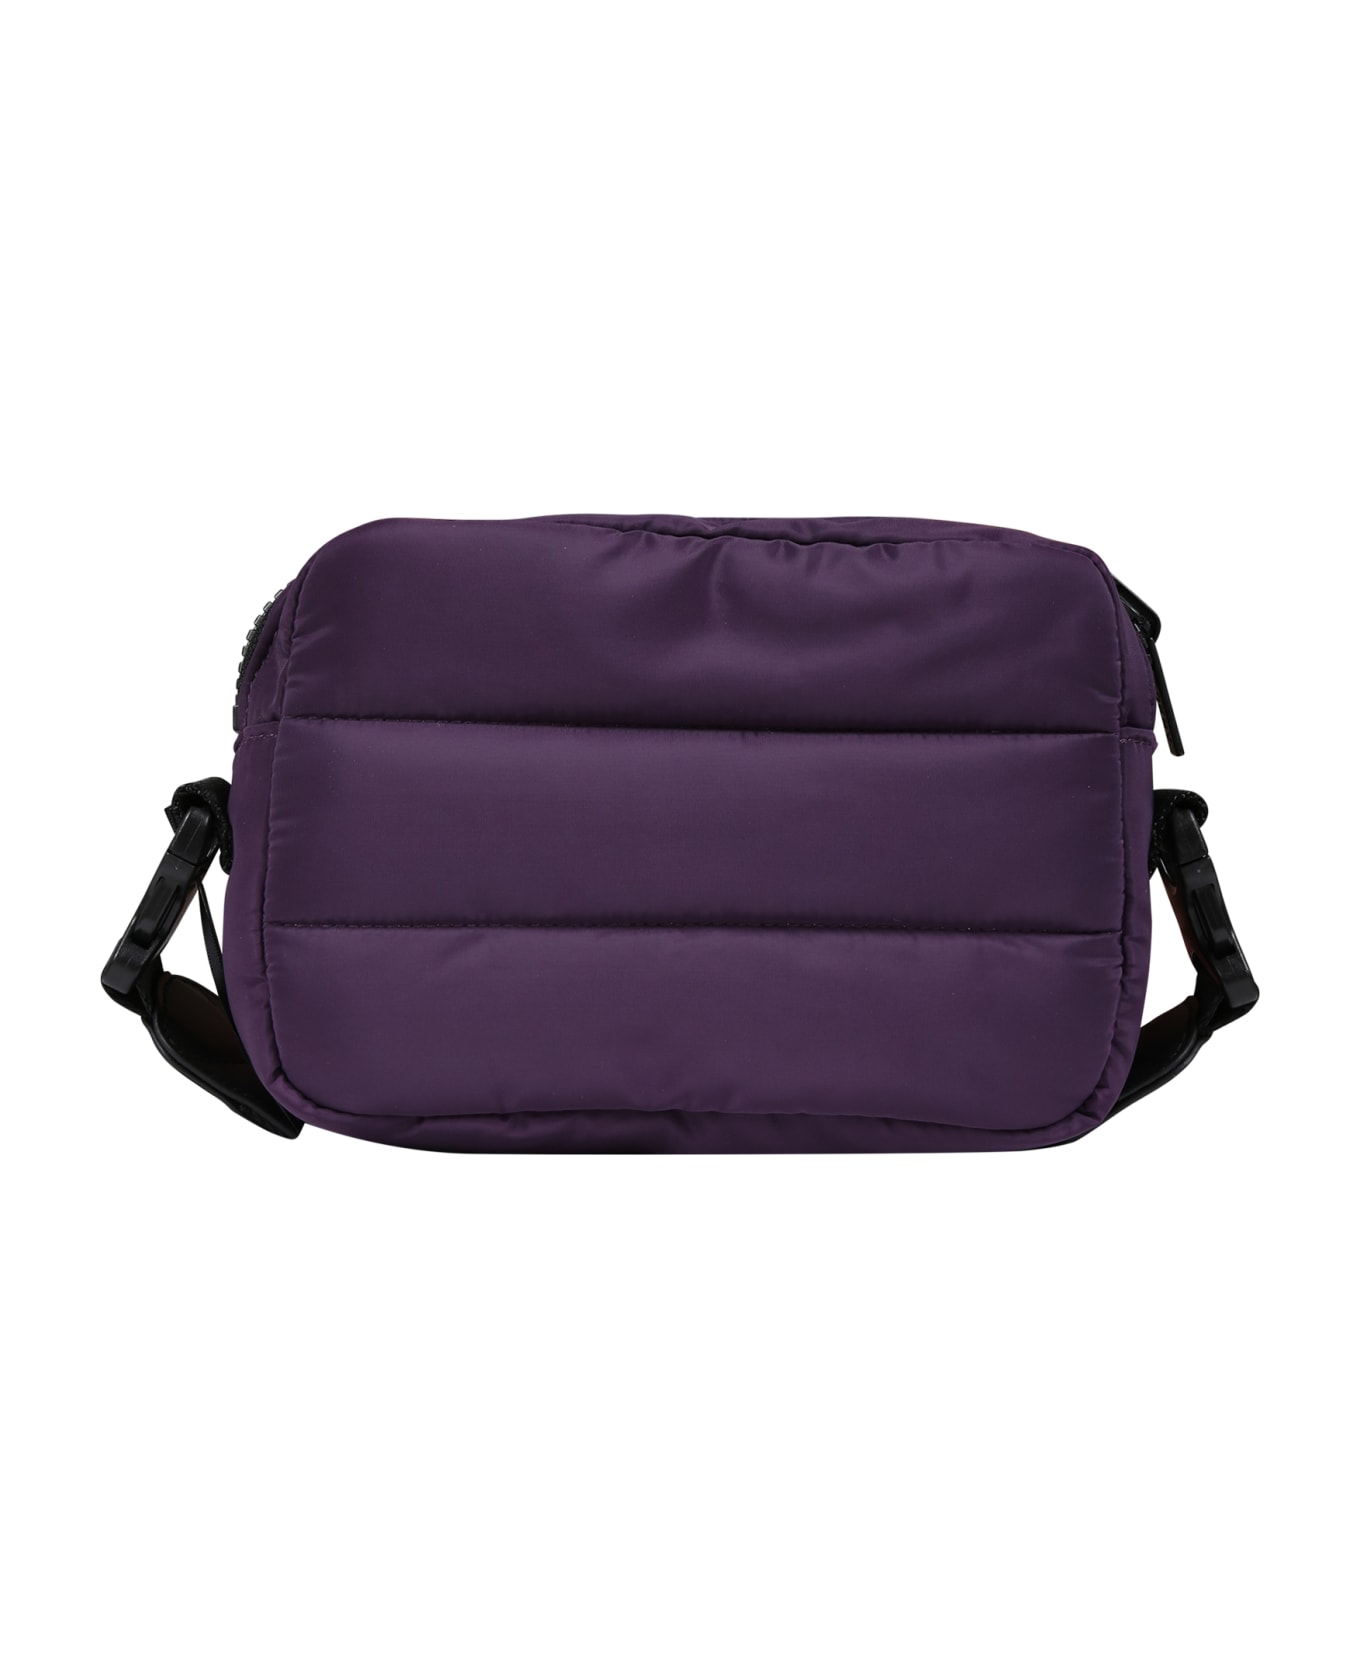 DKNY Purple Reversible Bag For Girl With Logo - Violetto